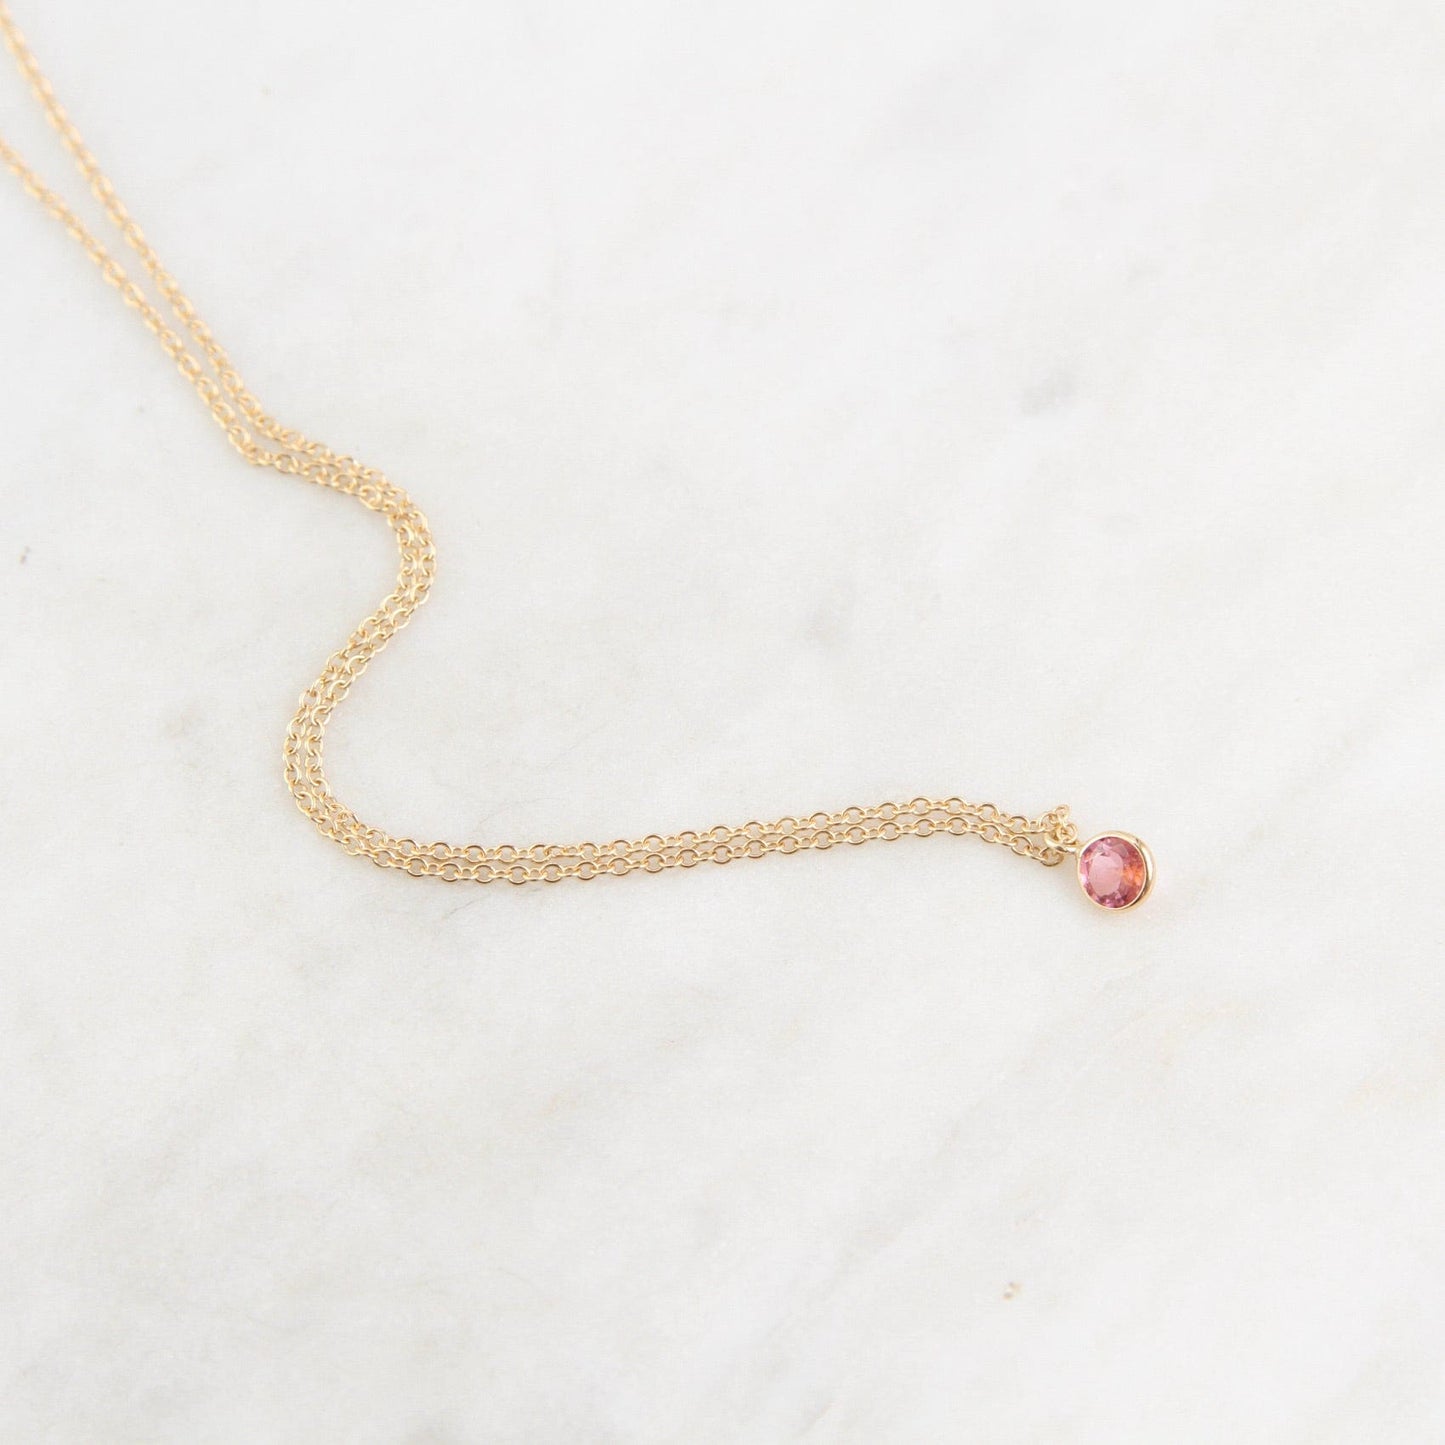 NKL-14K Yellow Gold & Pink Tourmaline Solitaire Necklace